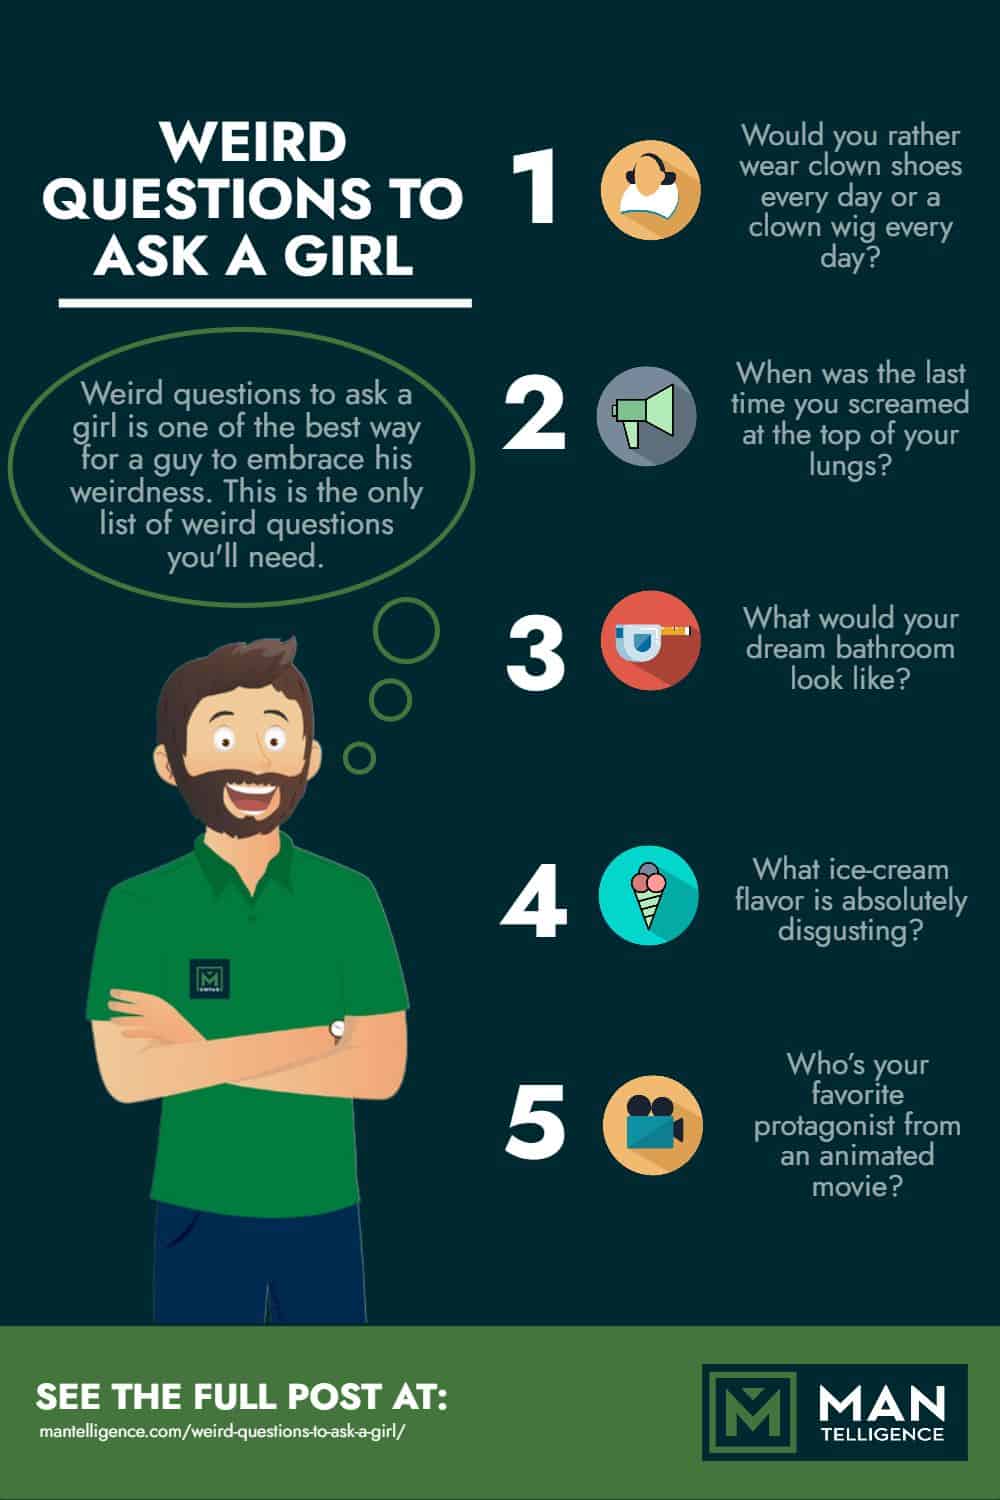 Weird Questions to Ask a Girl - INFOGRAPHIC